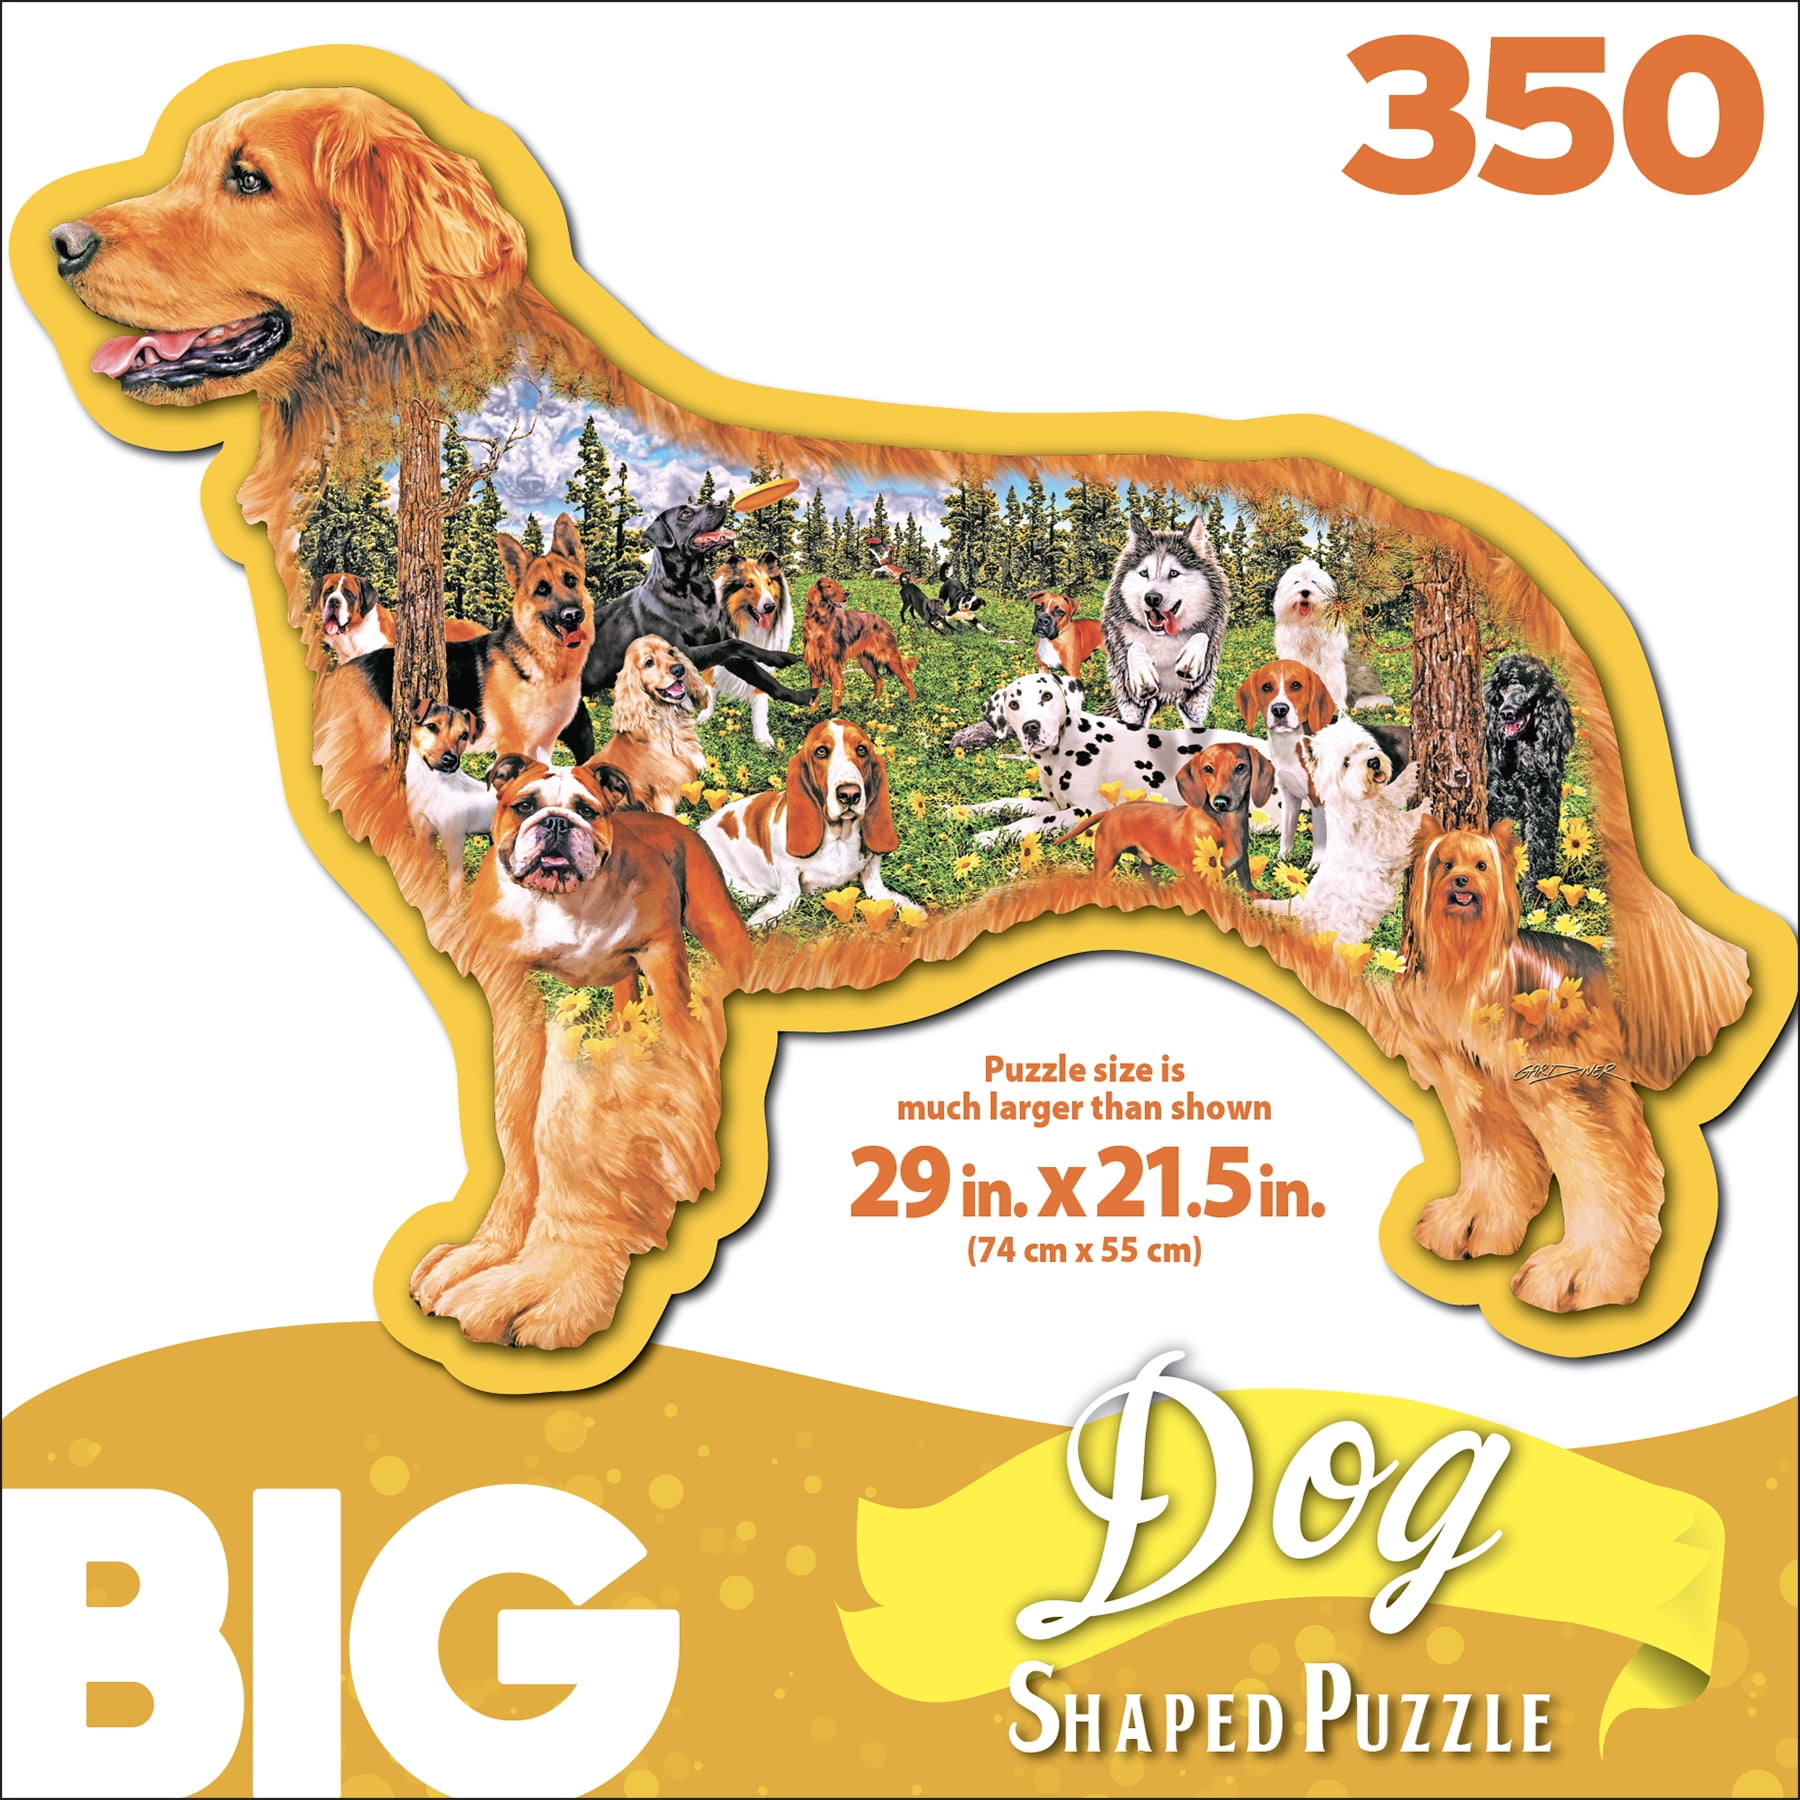 300 Piece Jigsaw Puzzle for Kids & Adults Enjoy it Doodle Puzzle Featuring Pop Art of Dean Russo